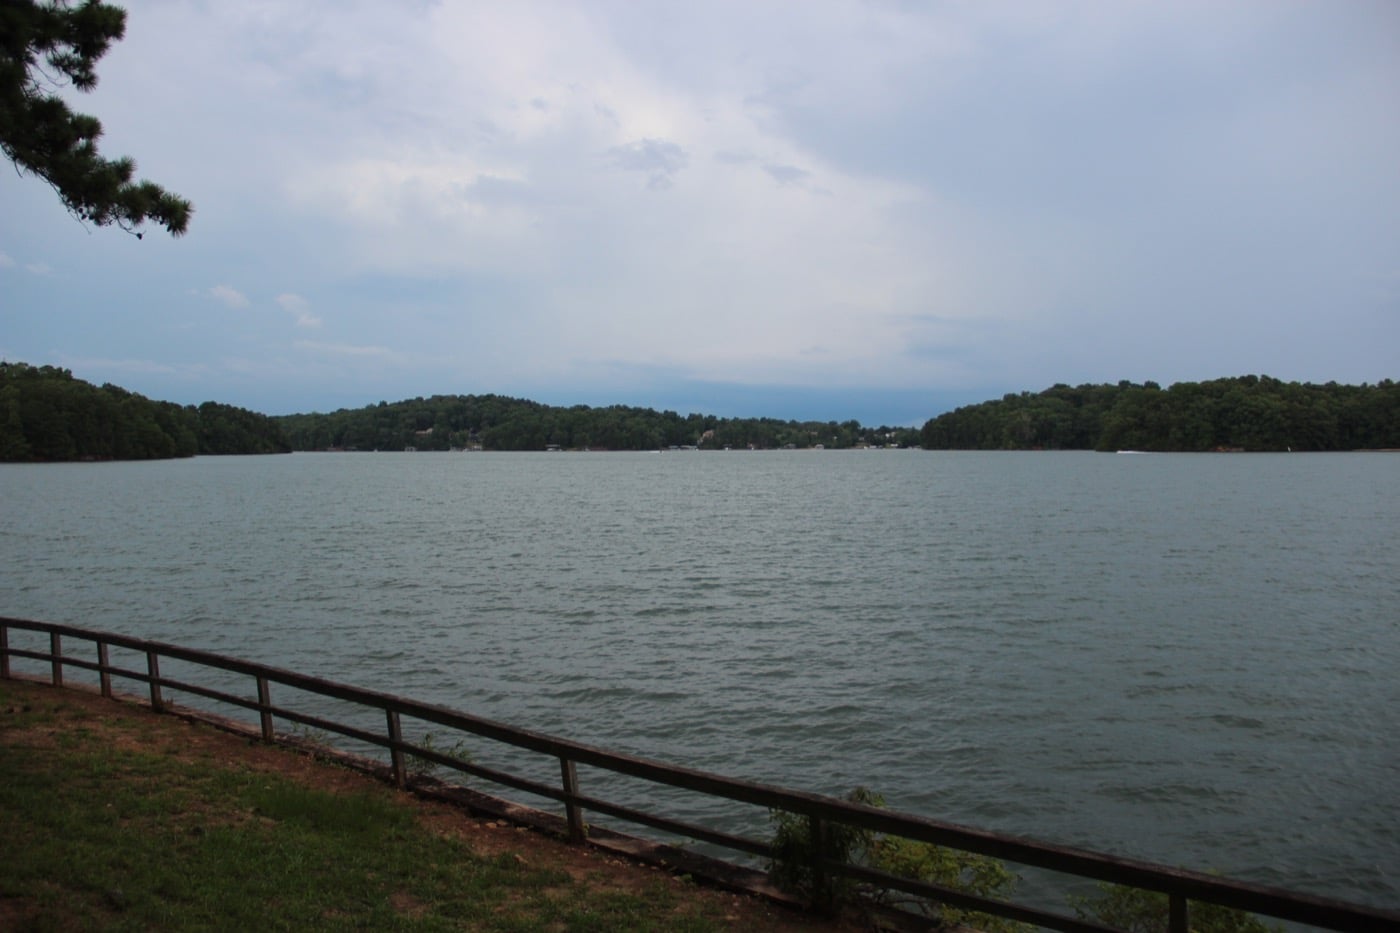 More details emerge about the death of a 24-year-old who was electrocuted in Lake Lanier